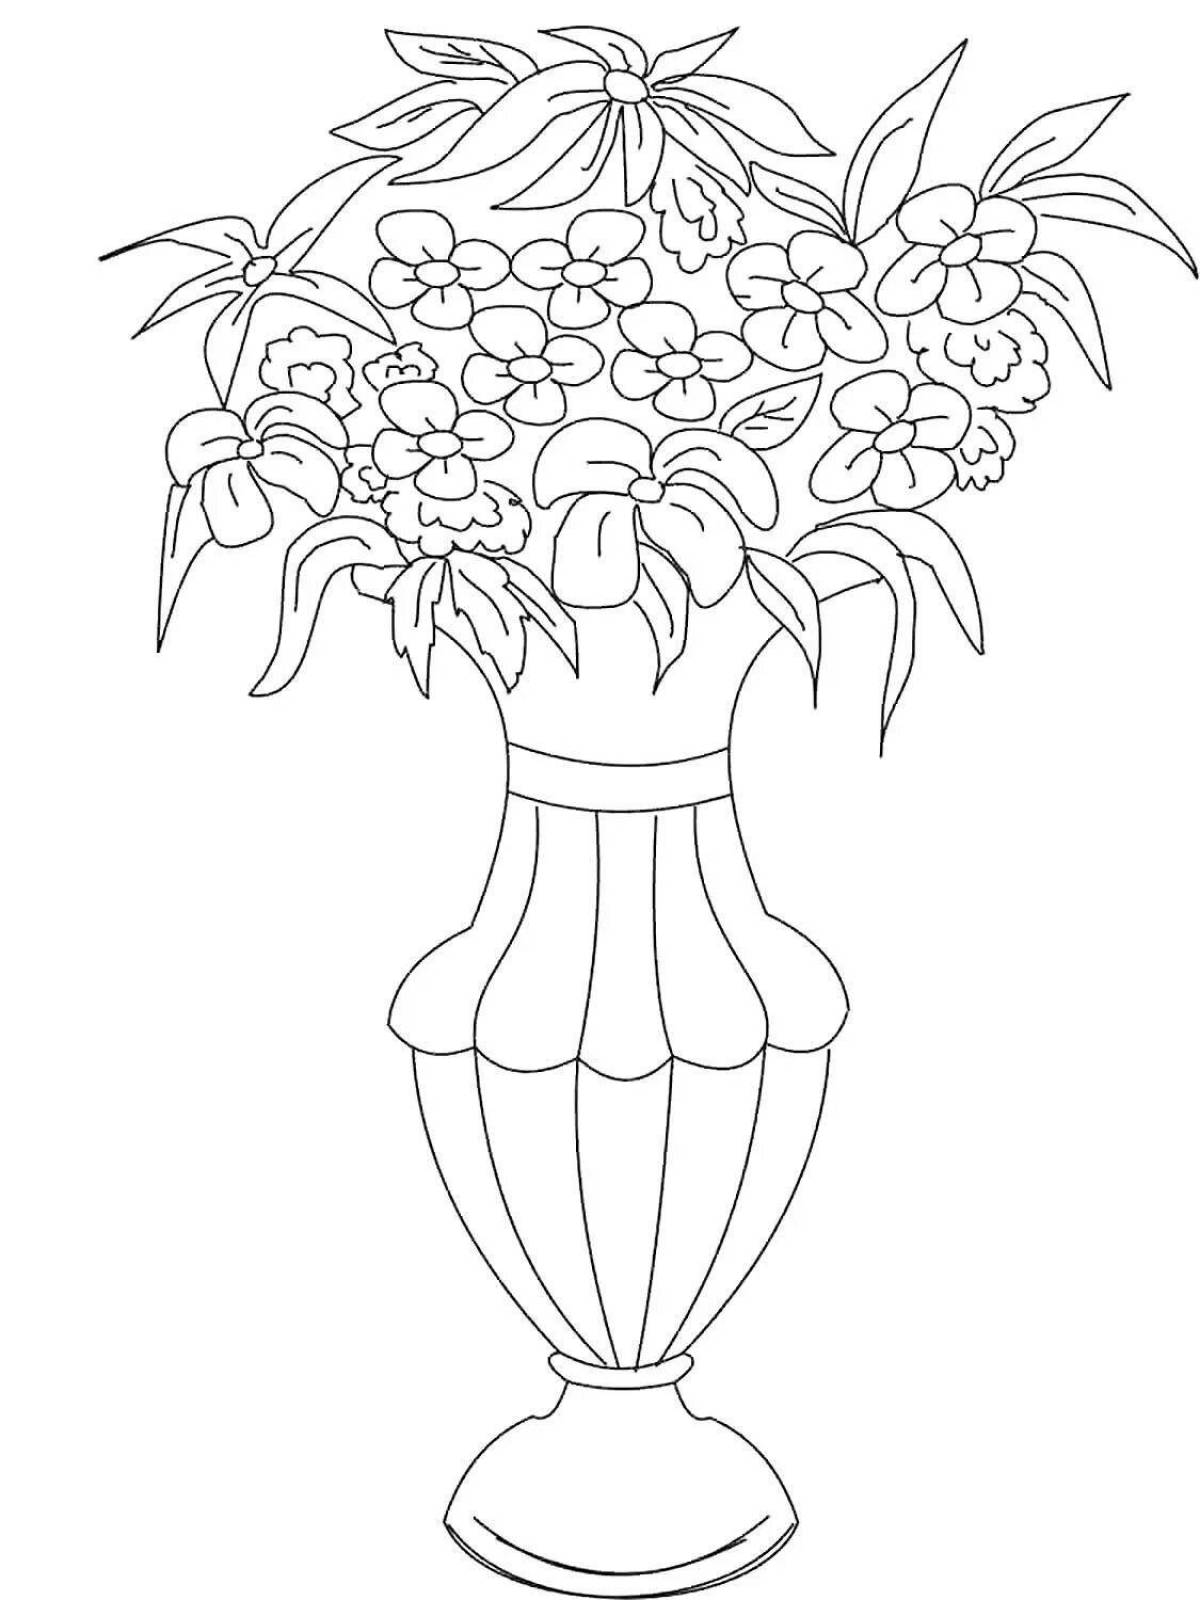 Funny vase of flowers coloring book for kids